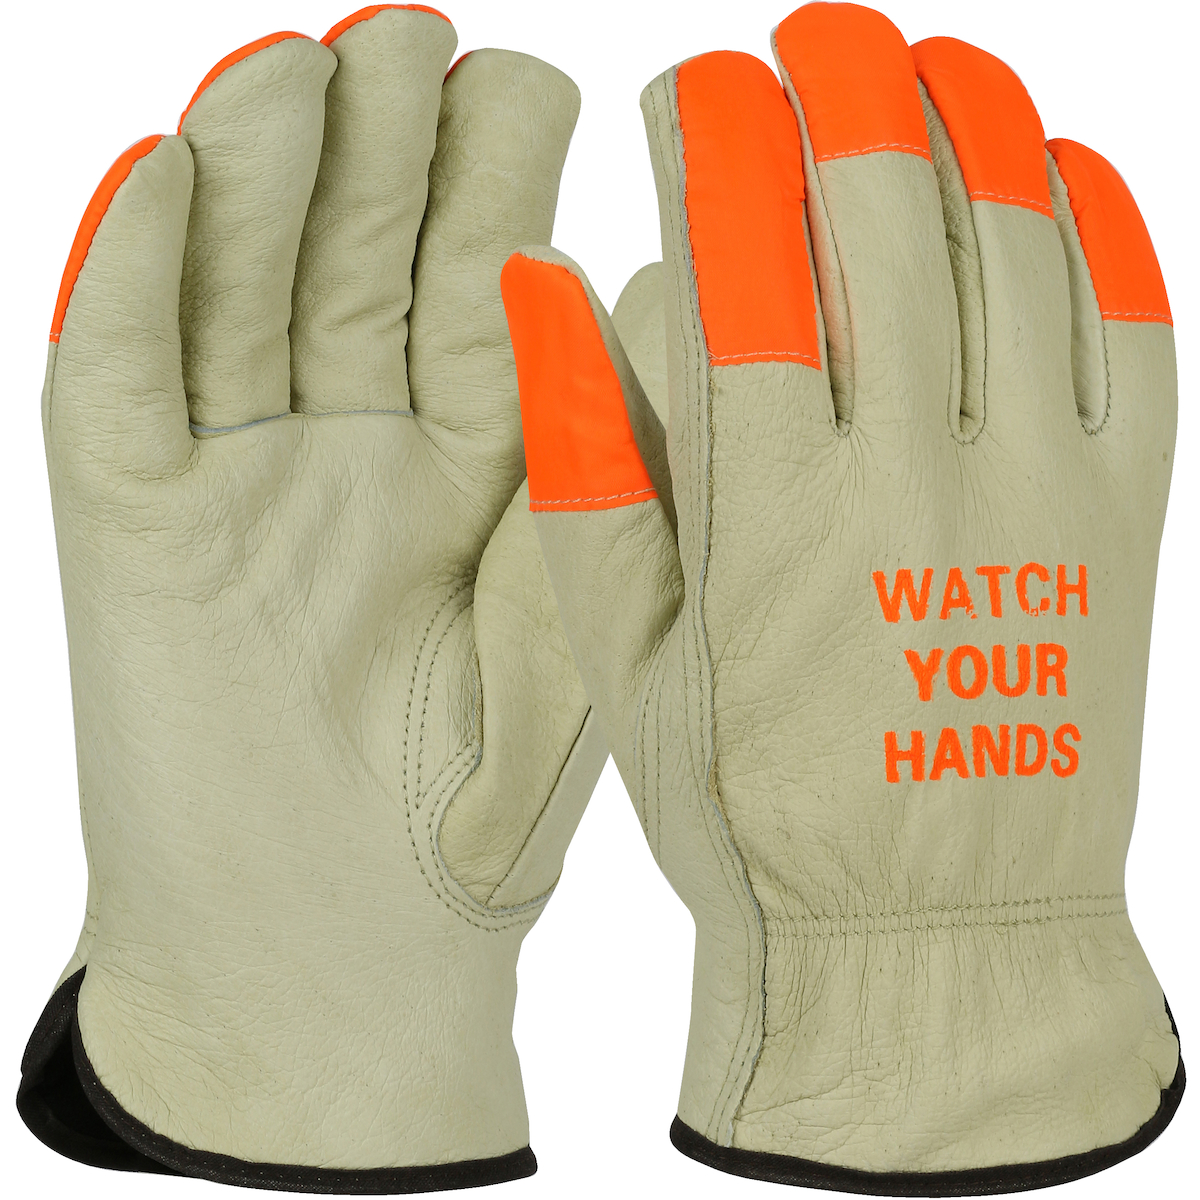 THERMAL PIGSKIN DRIVER WATCH YOUR HANDS - Insulated Leather Gloves